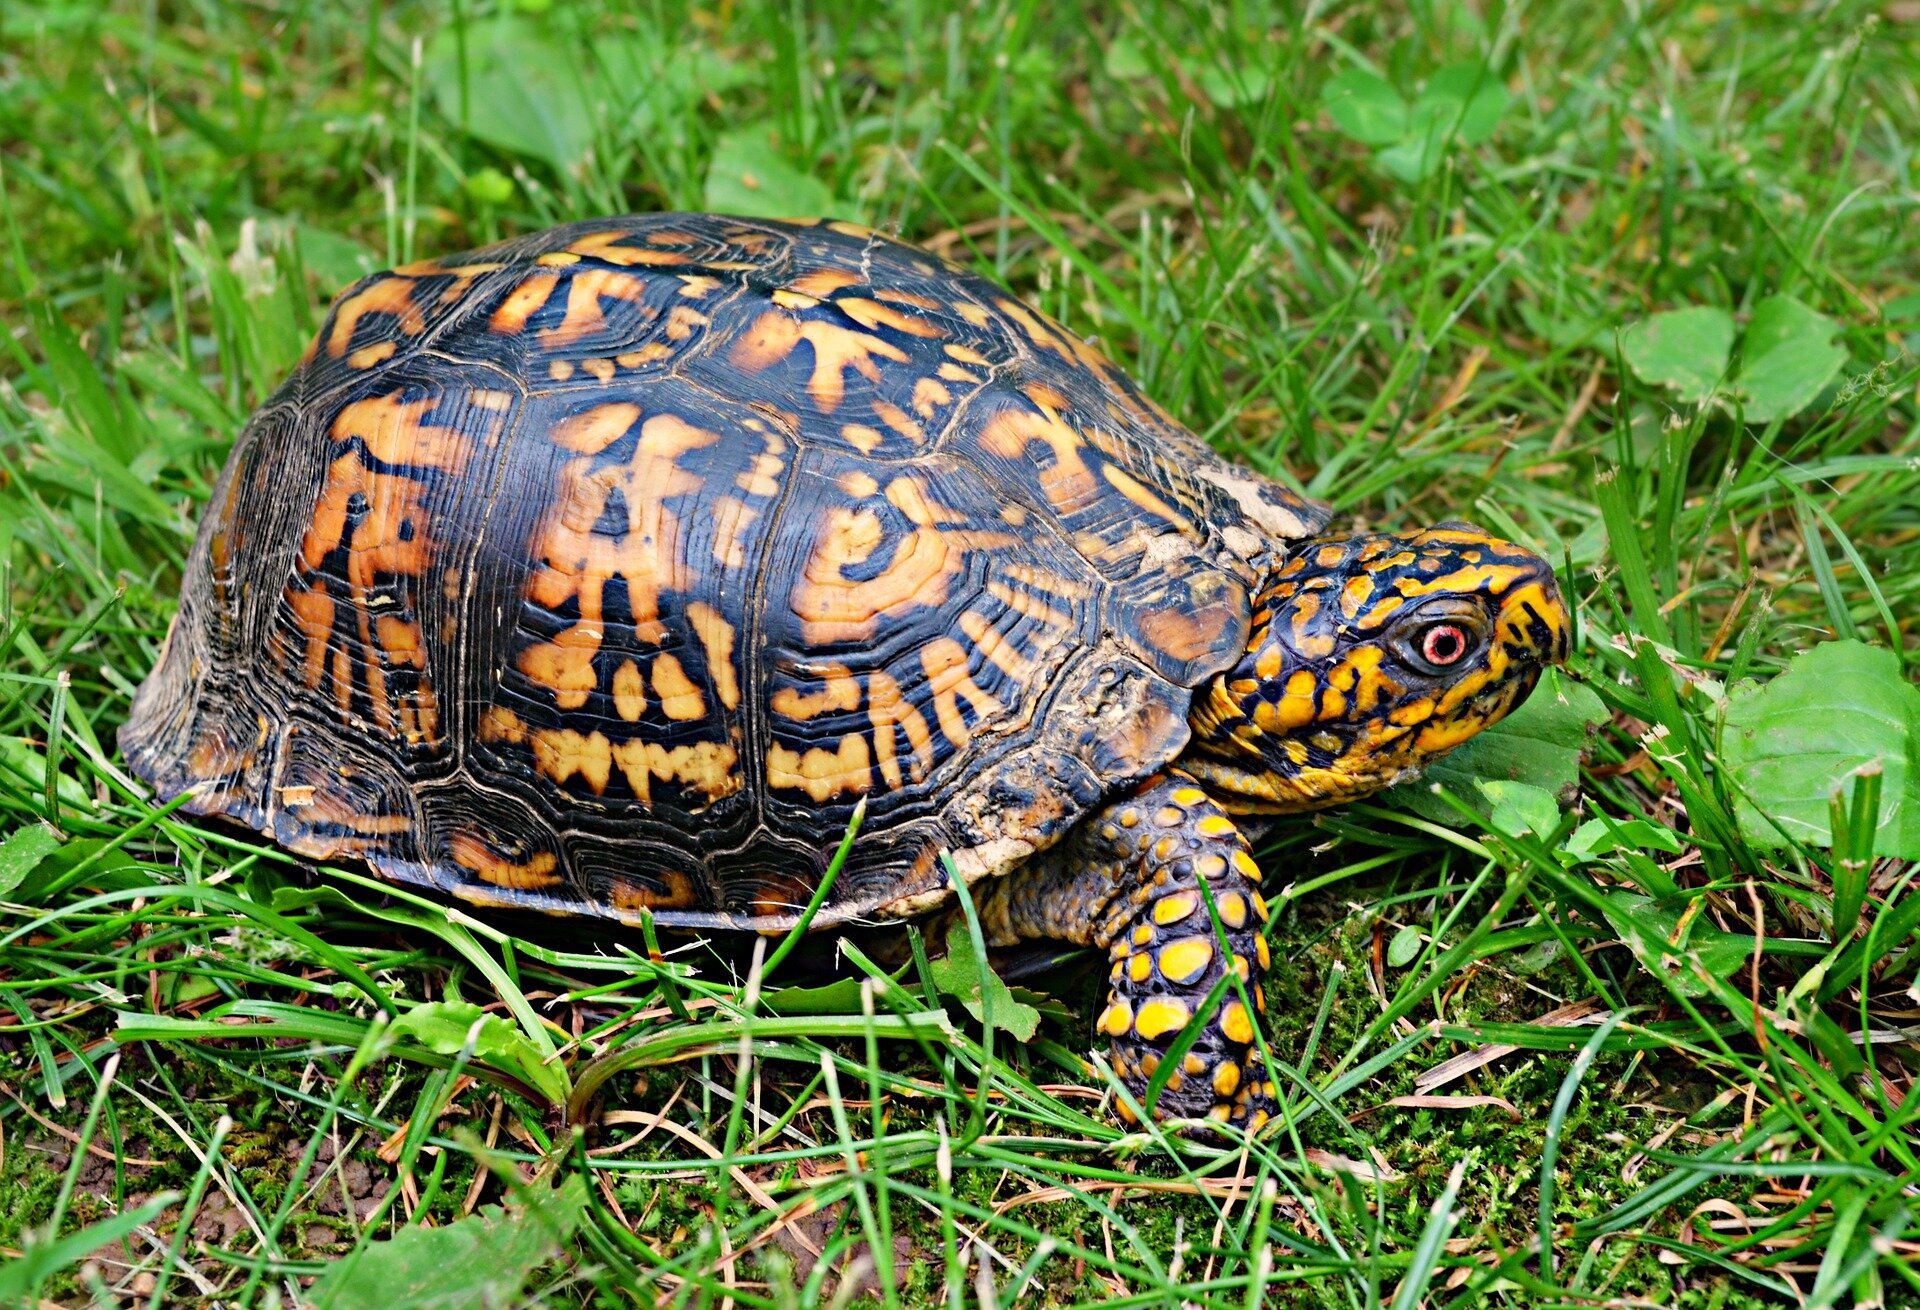 At Least 26 People Sickened by Salmonella Outbreak Linked to Turtles